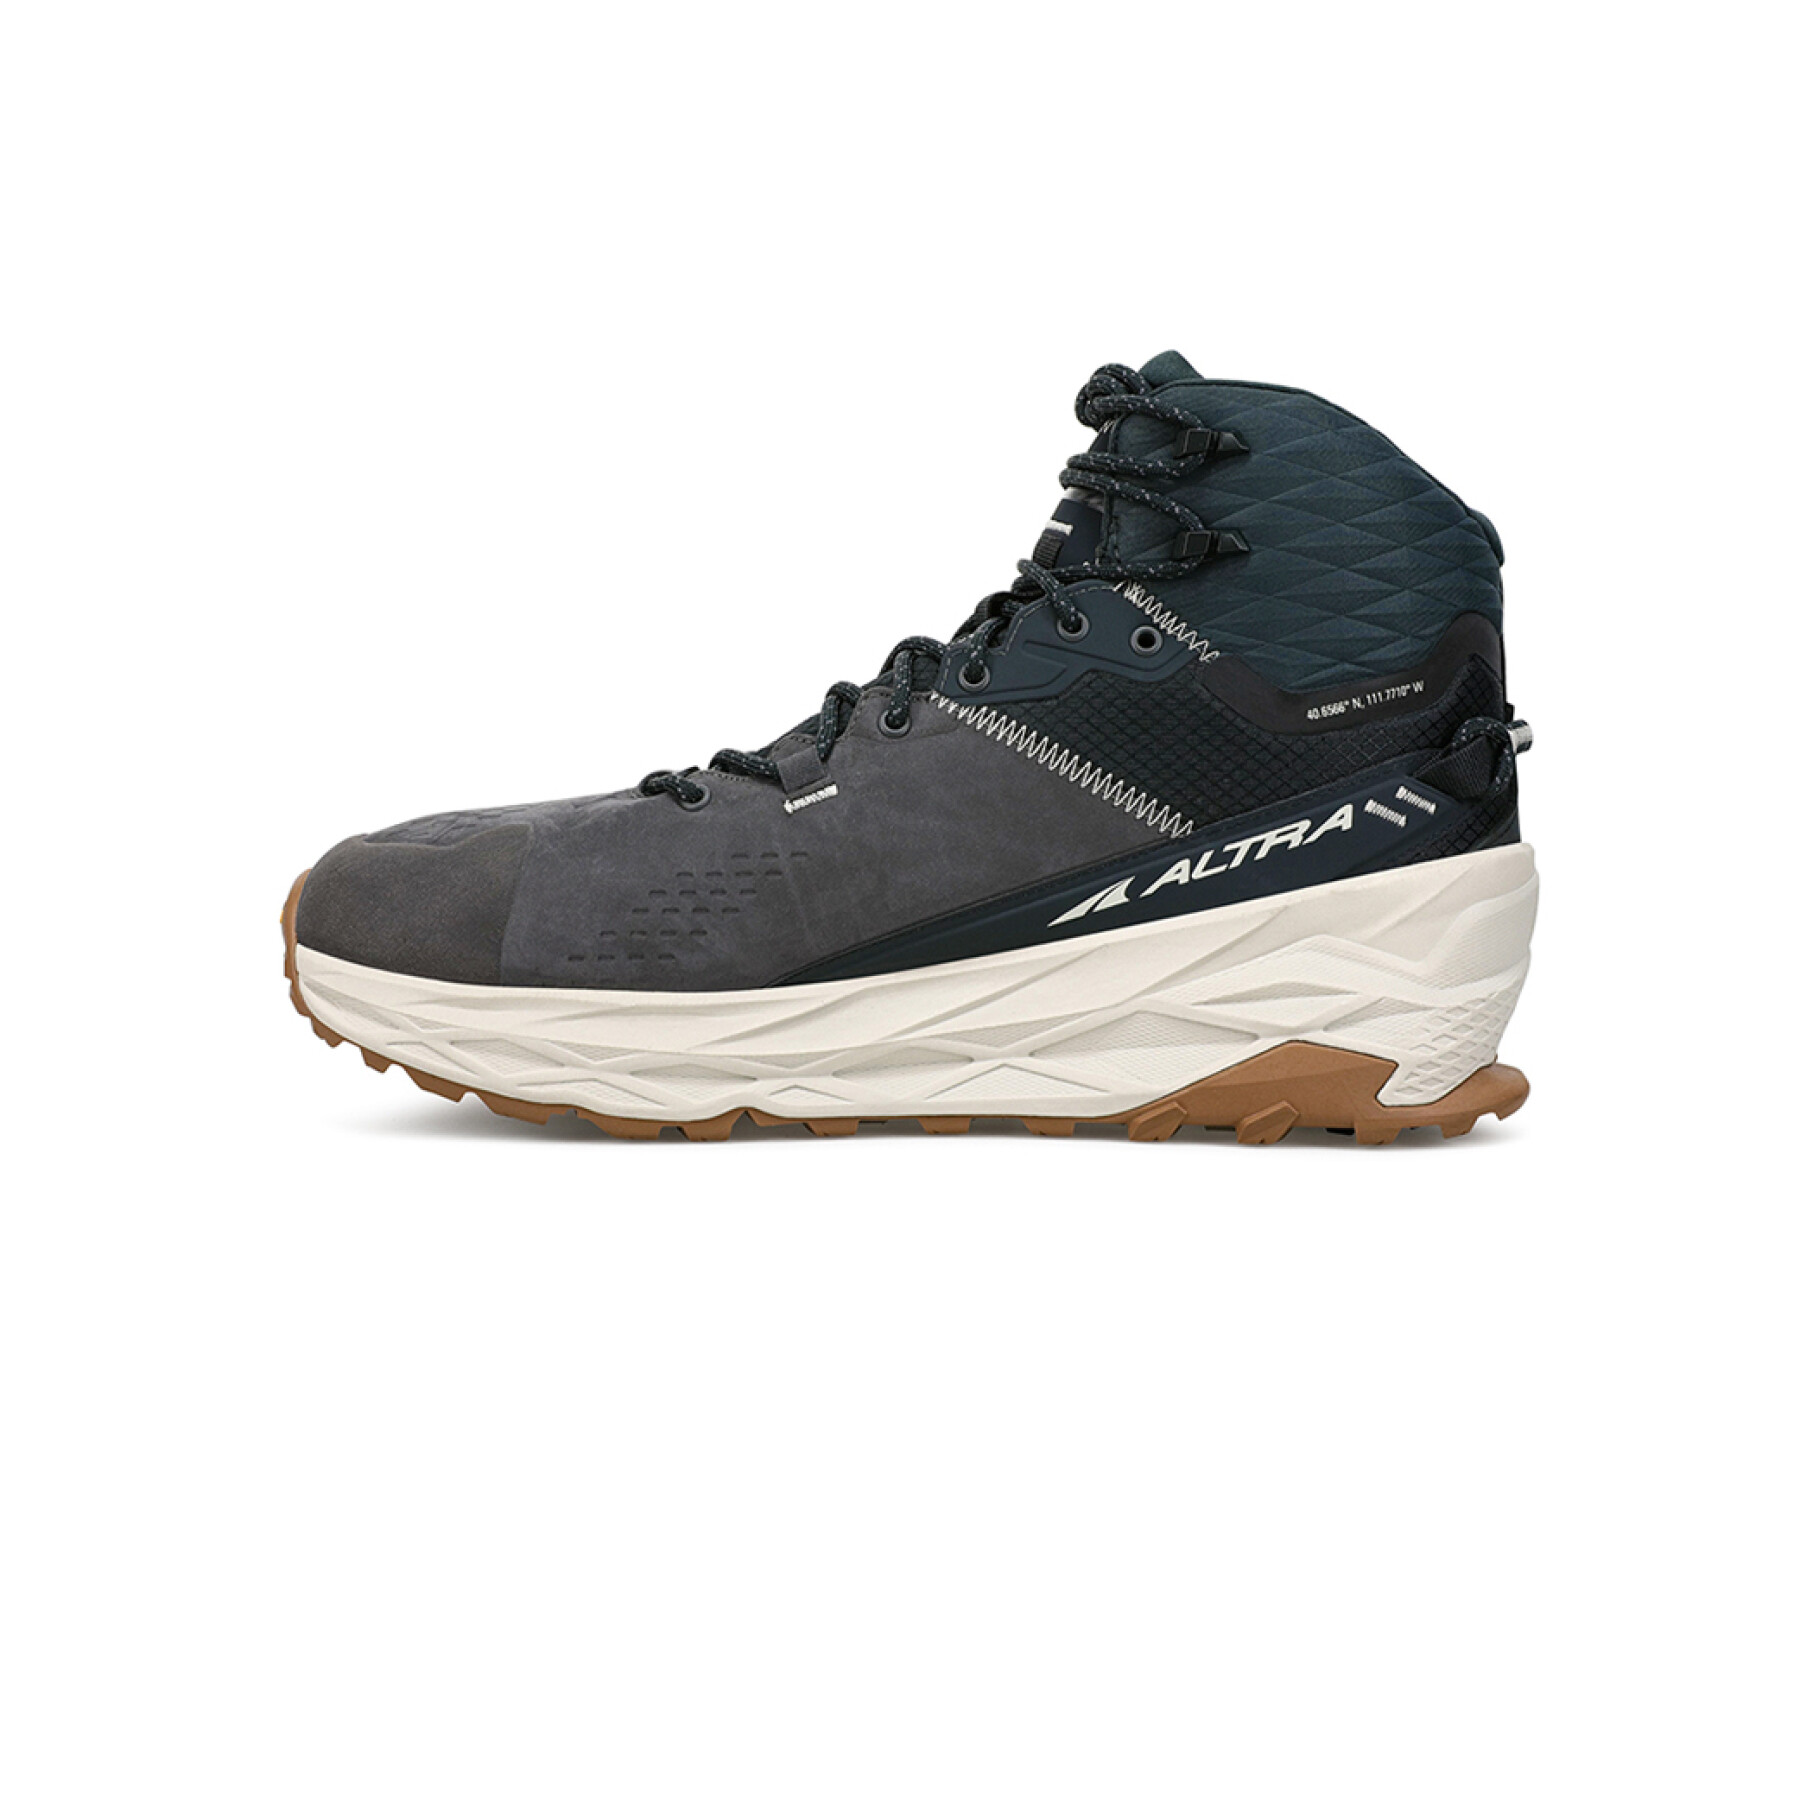 Hiking shoes Altra Olympus 5 Mid Gore-Tex